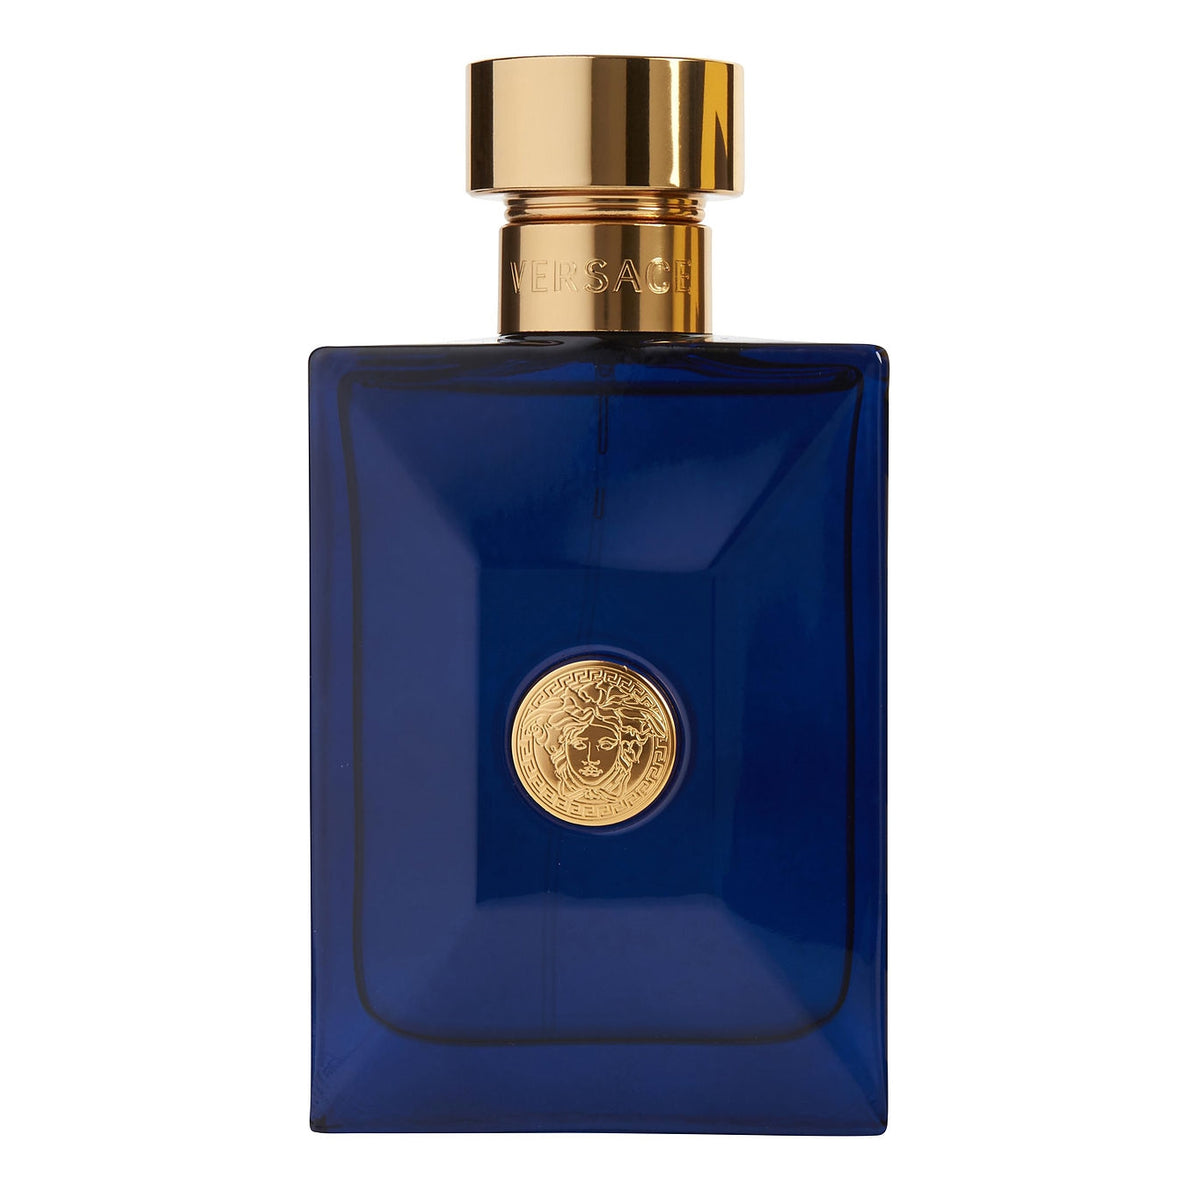 Shop for samples of Dylan Blue (Eau de Toilette) by Versace for men  rebottled and repacked by